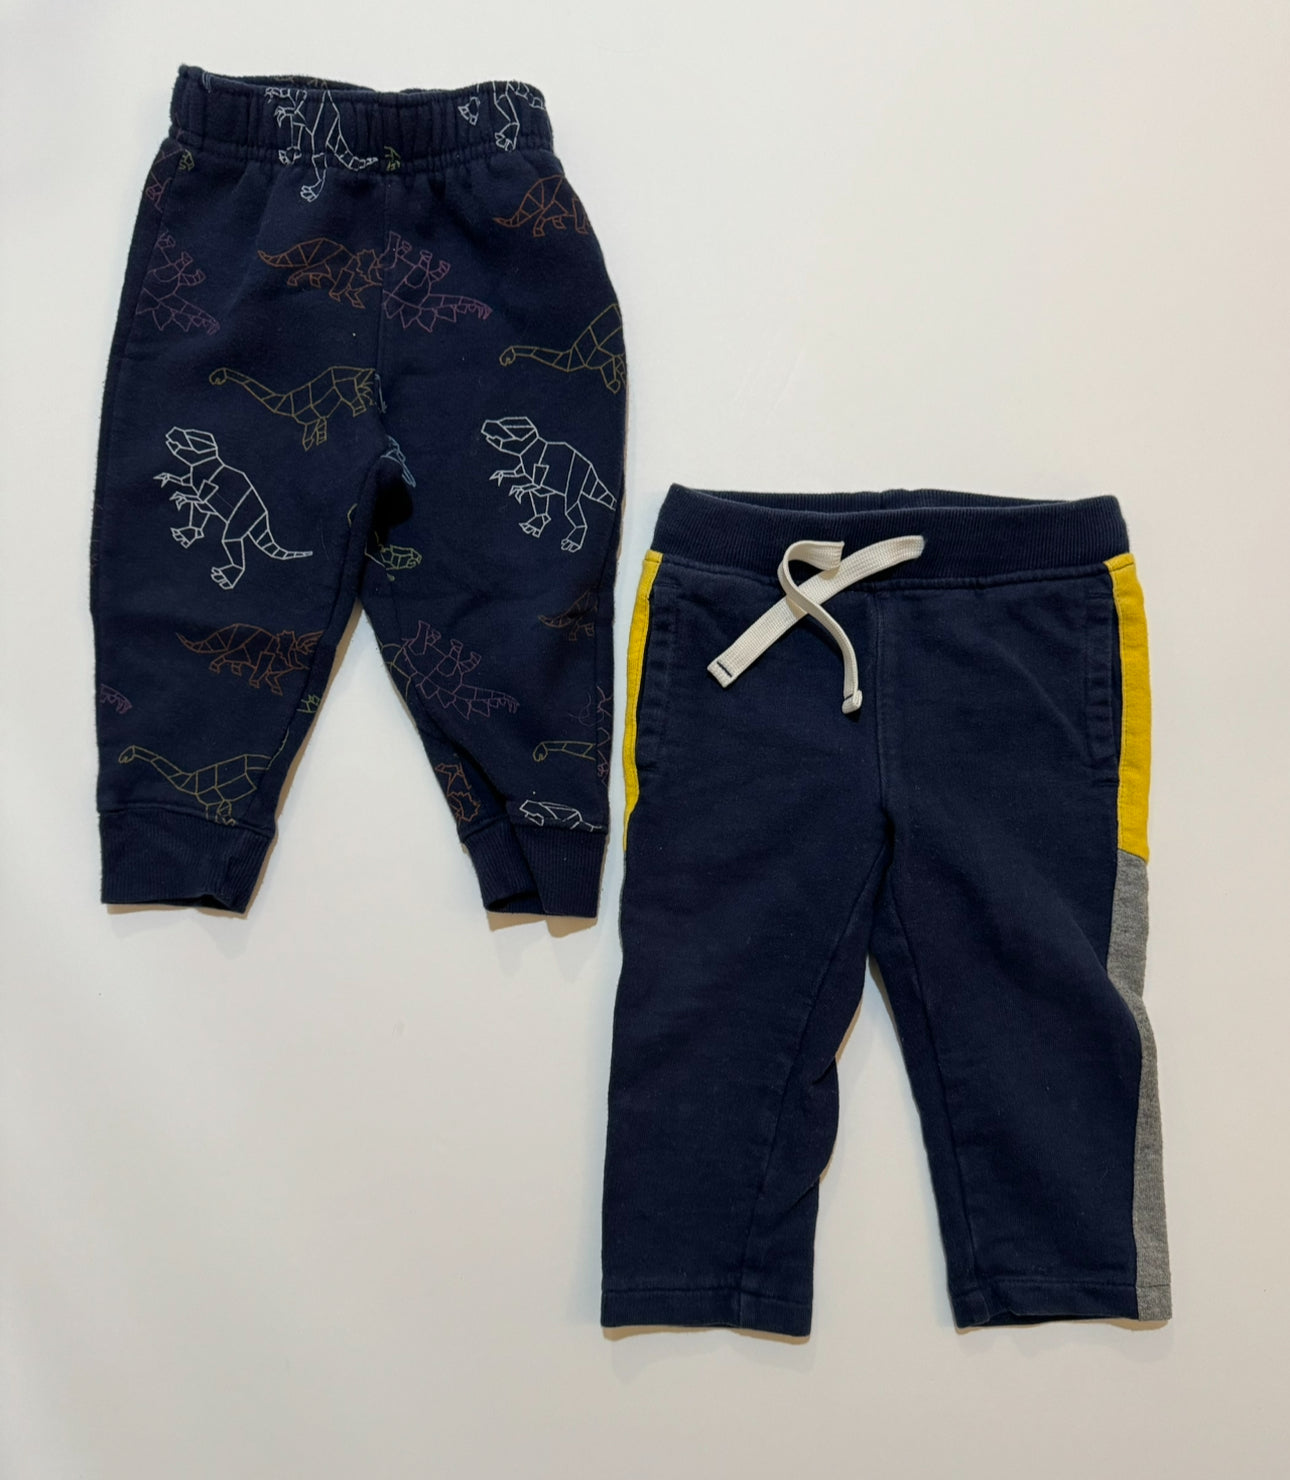 18 months Boys Cat and Jack and Carter's Sweatpant Bundle Navy Blue